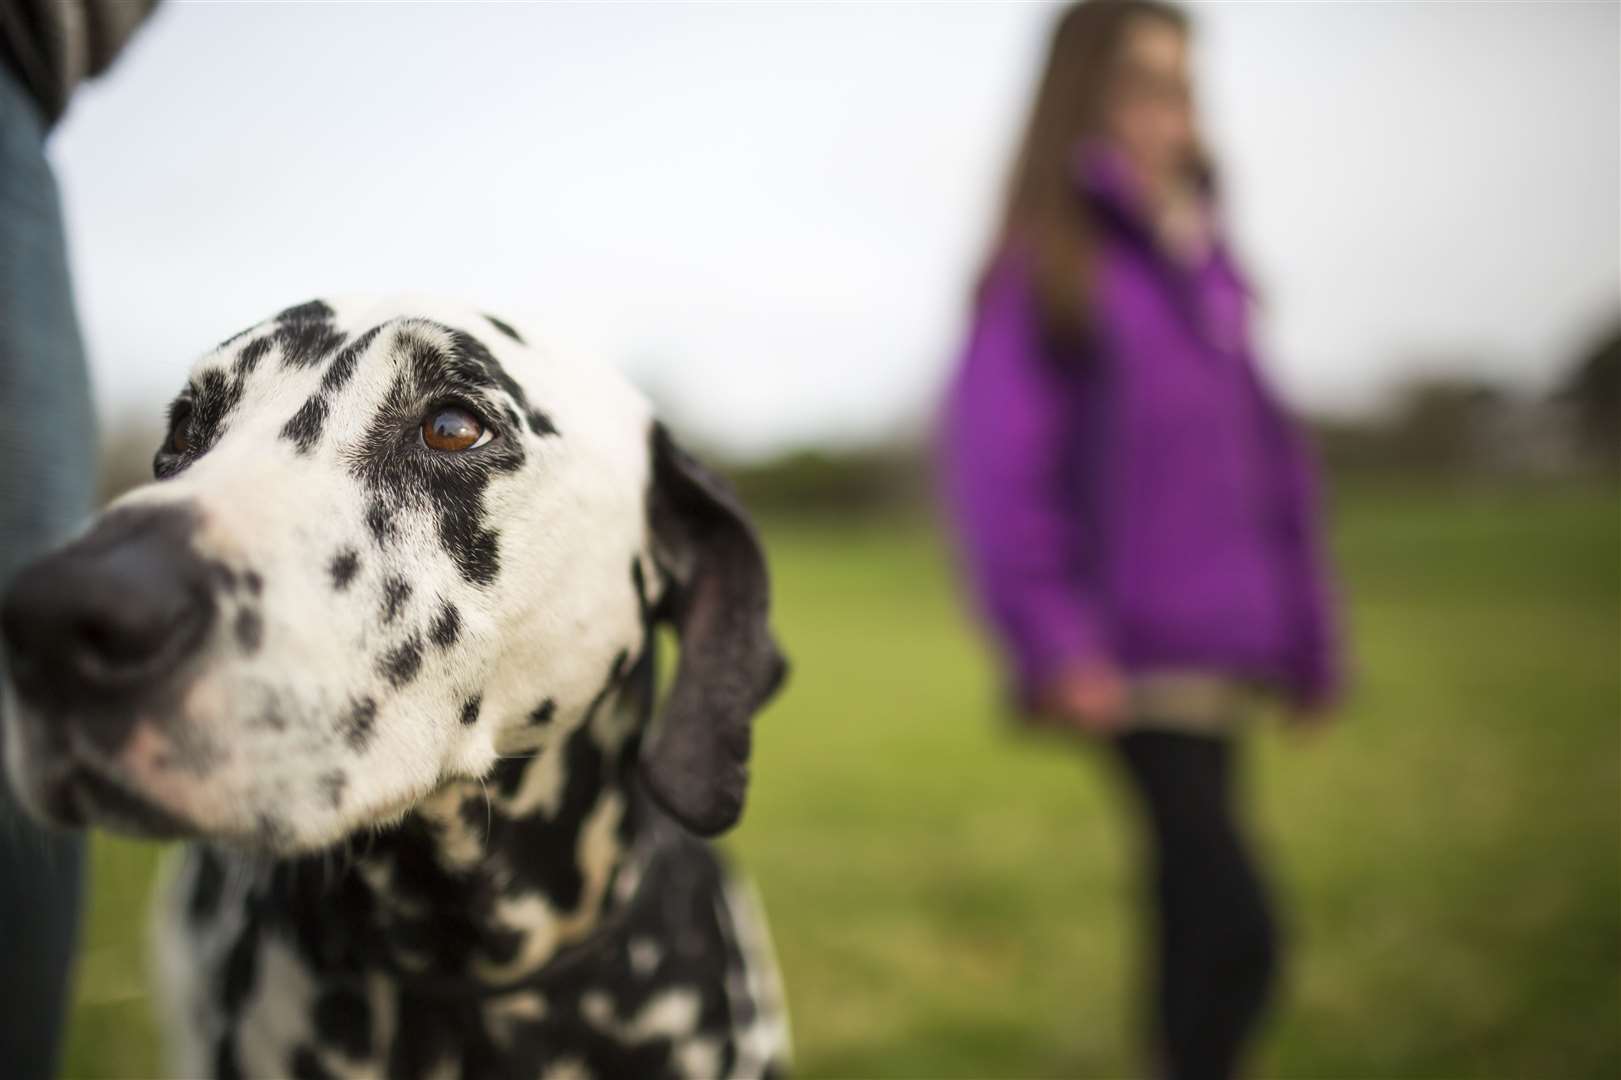 The National Trust has lots of good dog walks Picture: National Trust/Chris Lacey